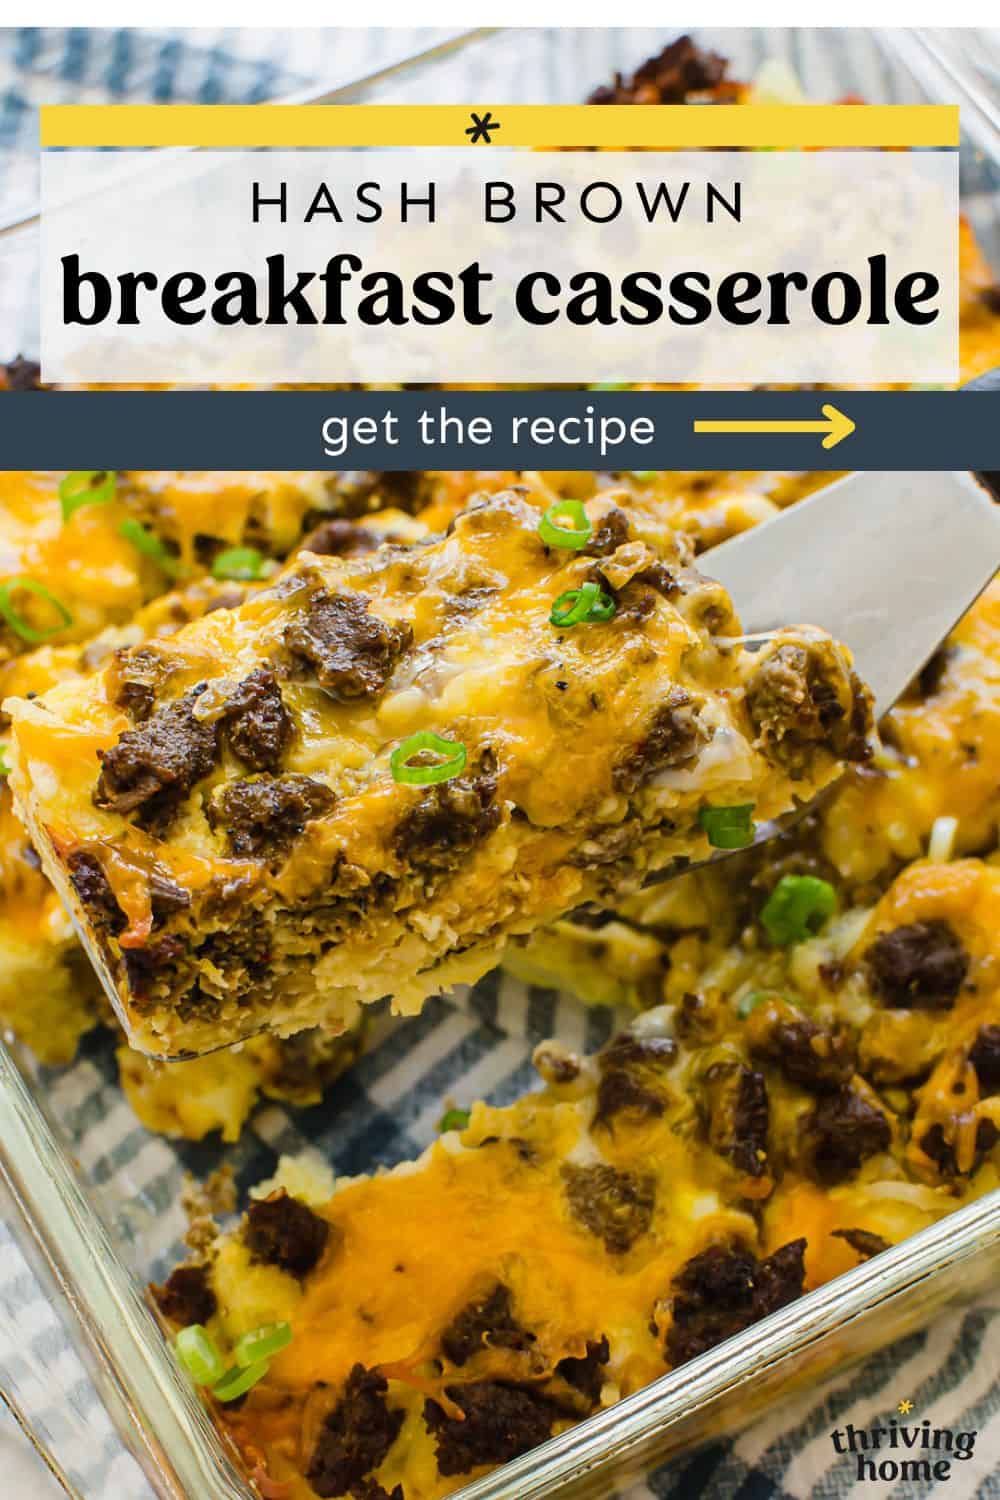 Make ahead breakfast casserole with hash browns and sausage.